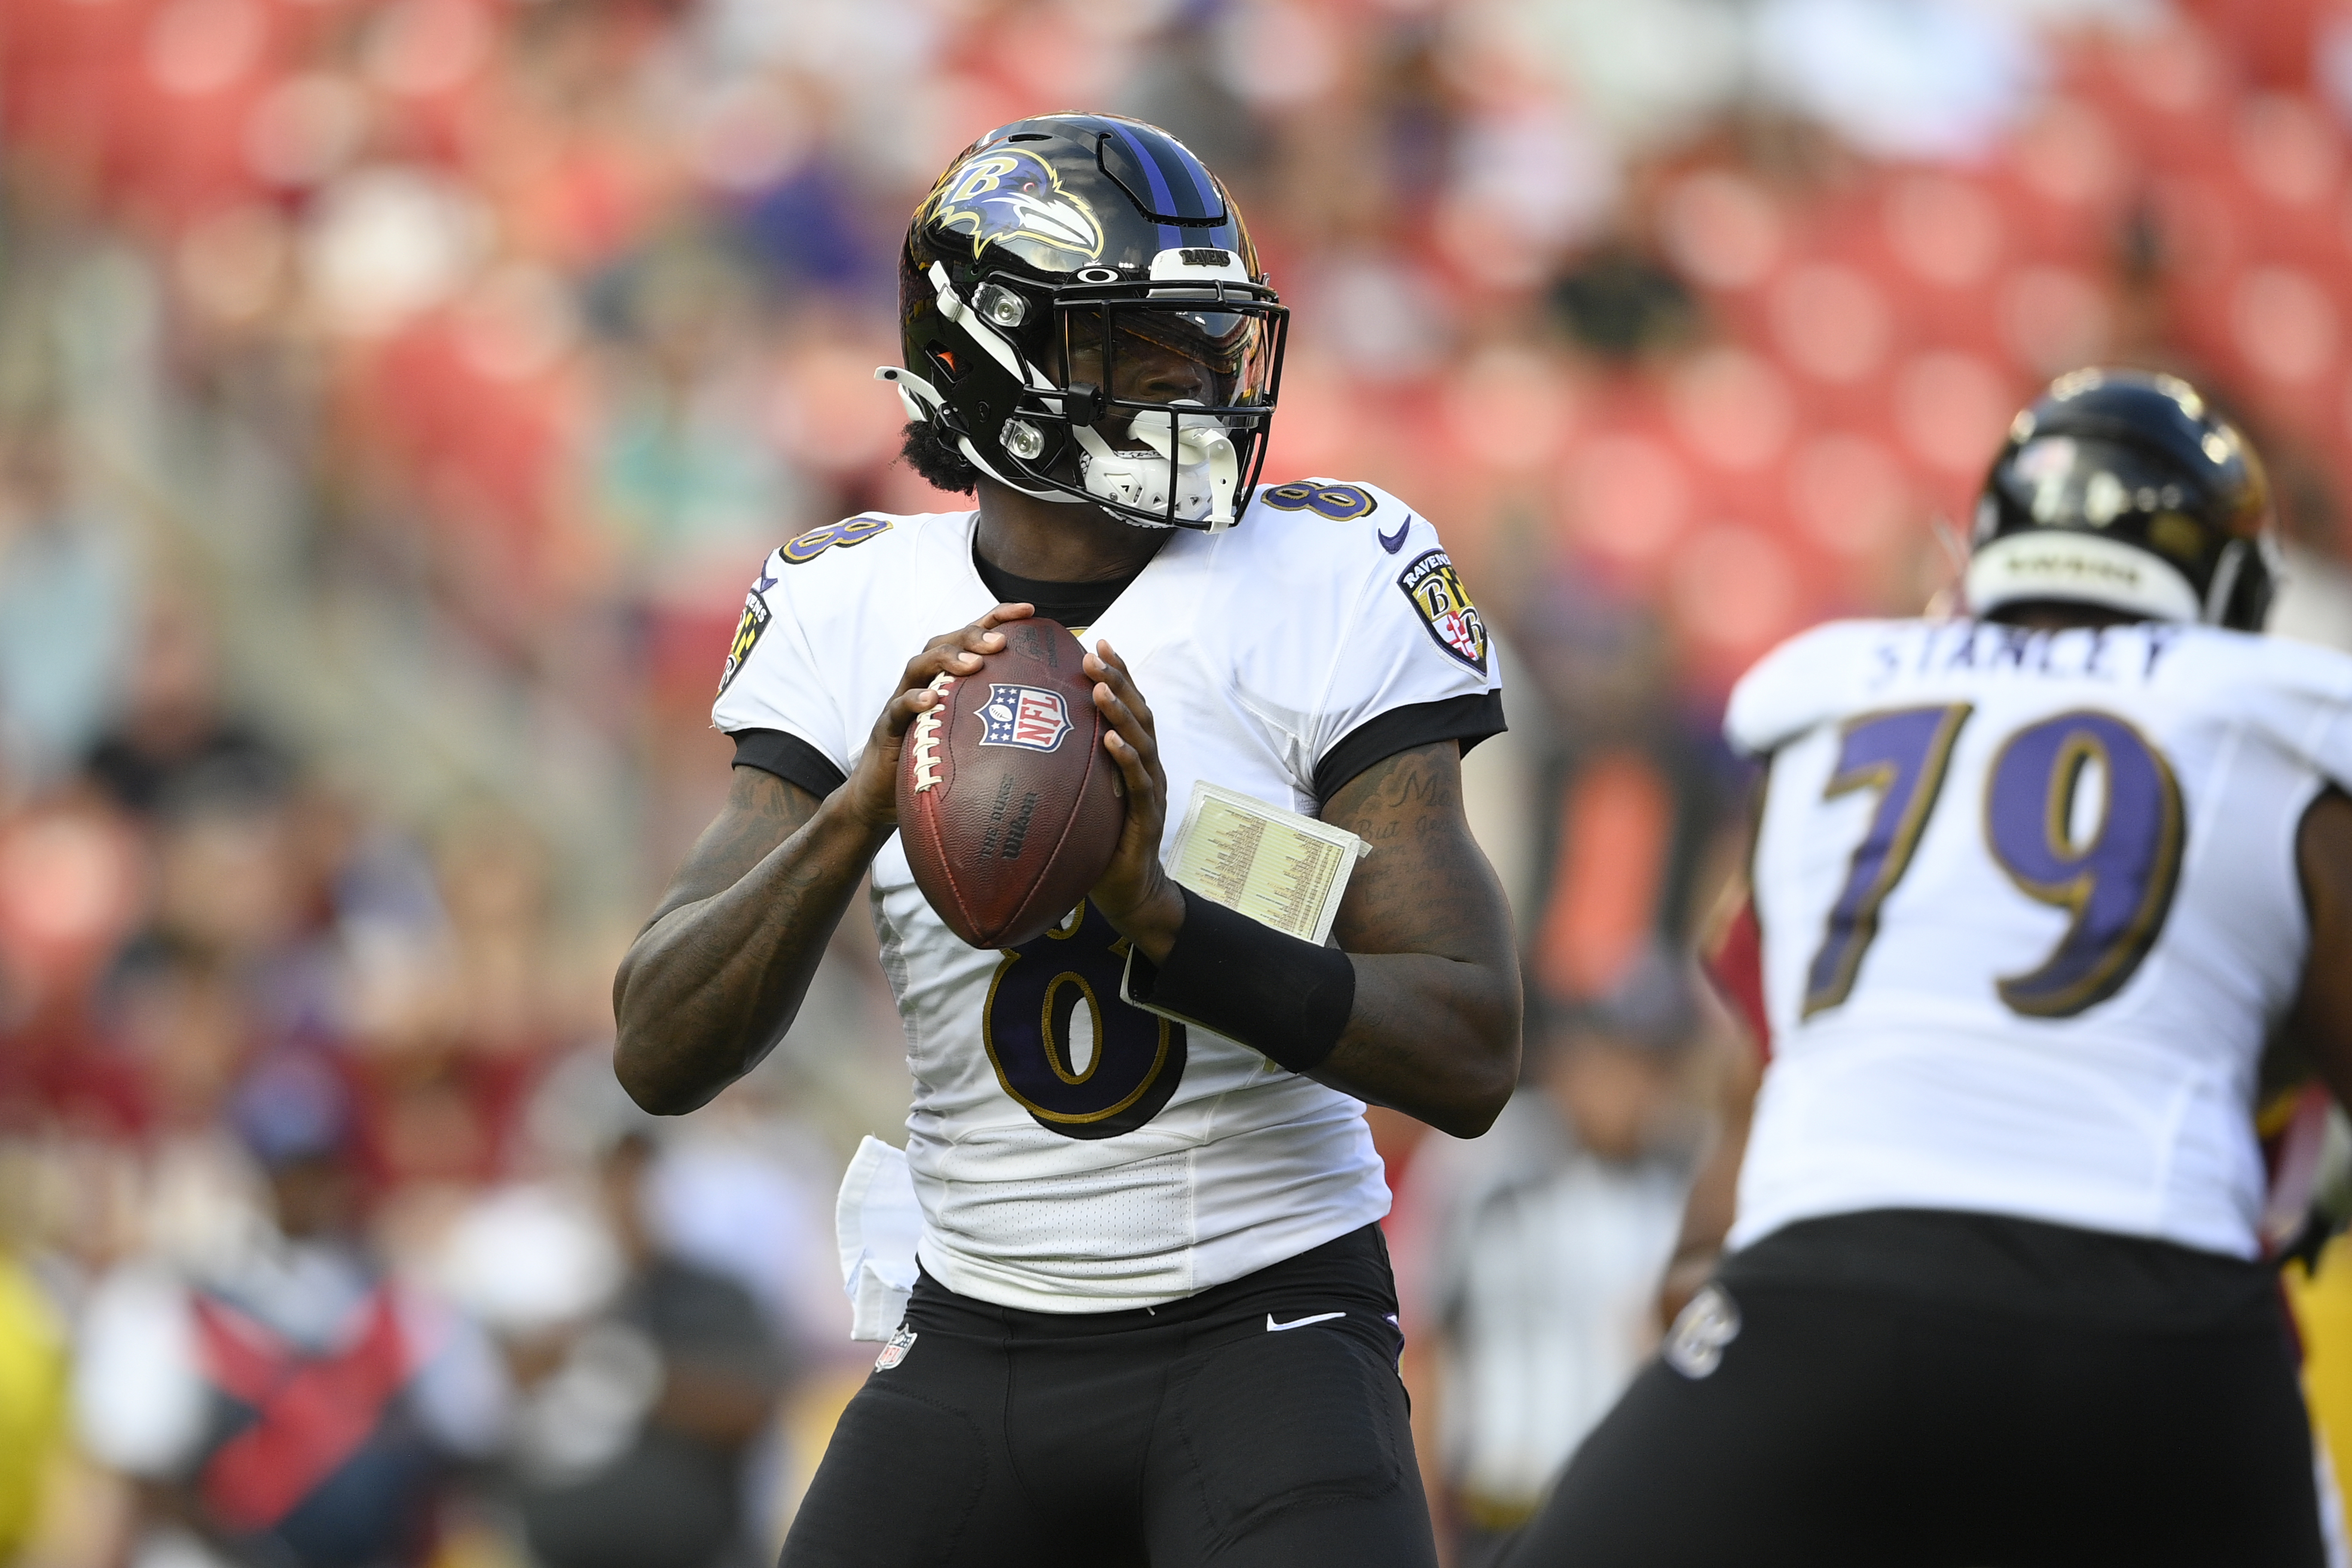 Ravens-Raiders live stream (9/13): How to watch online, TV, time 